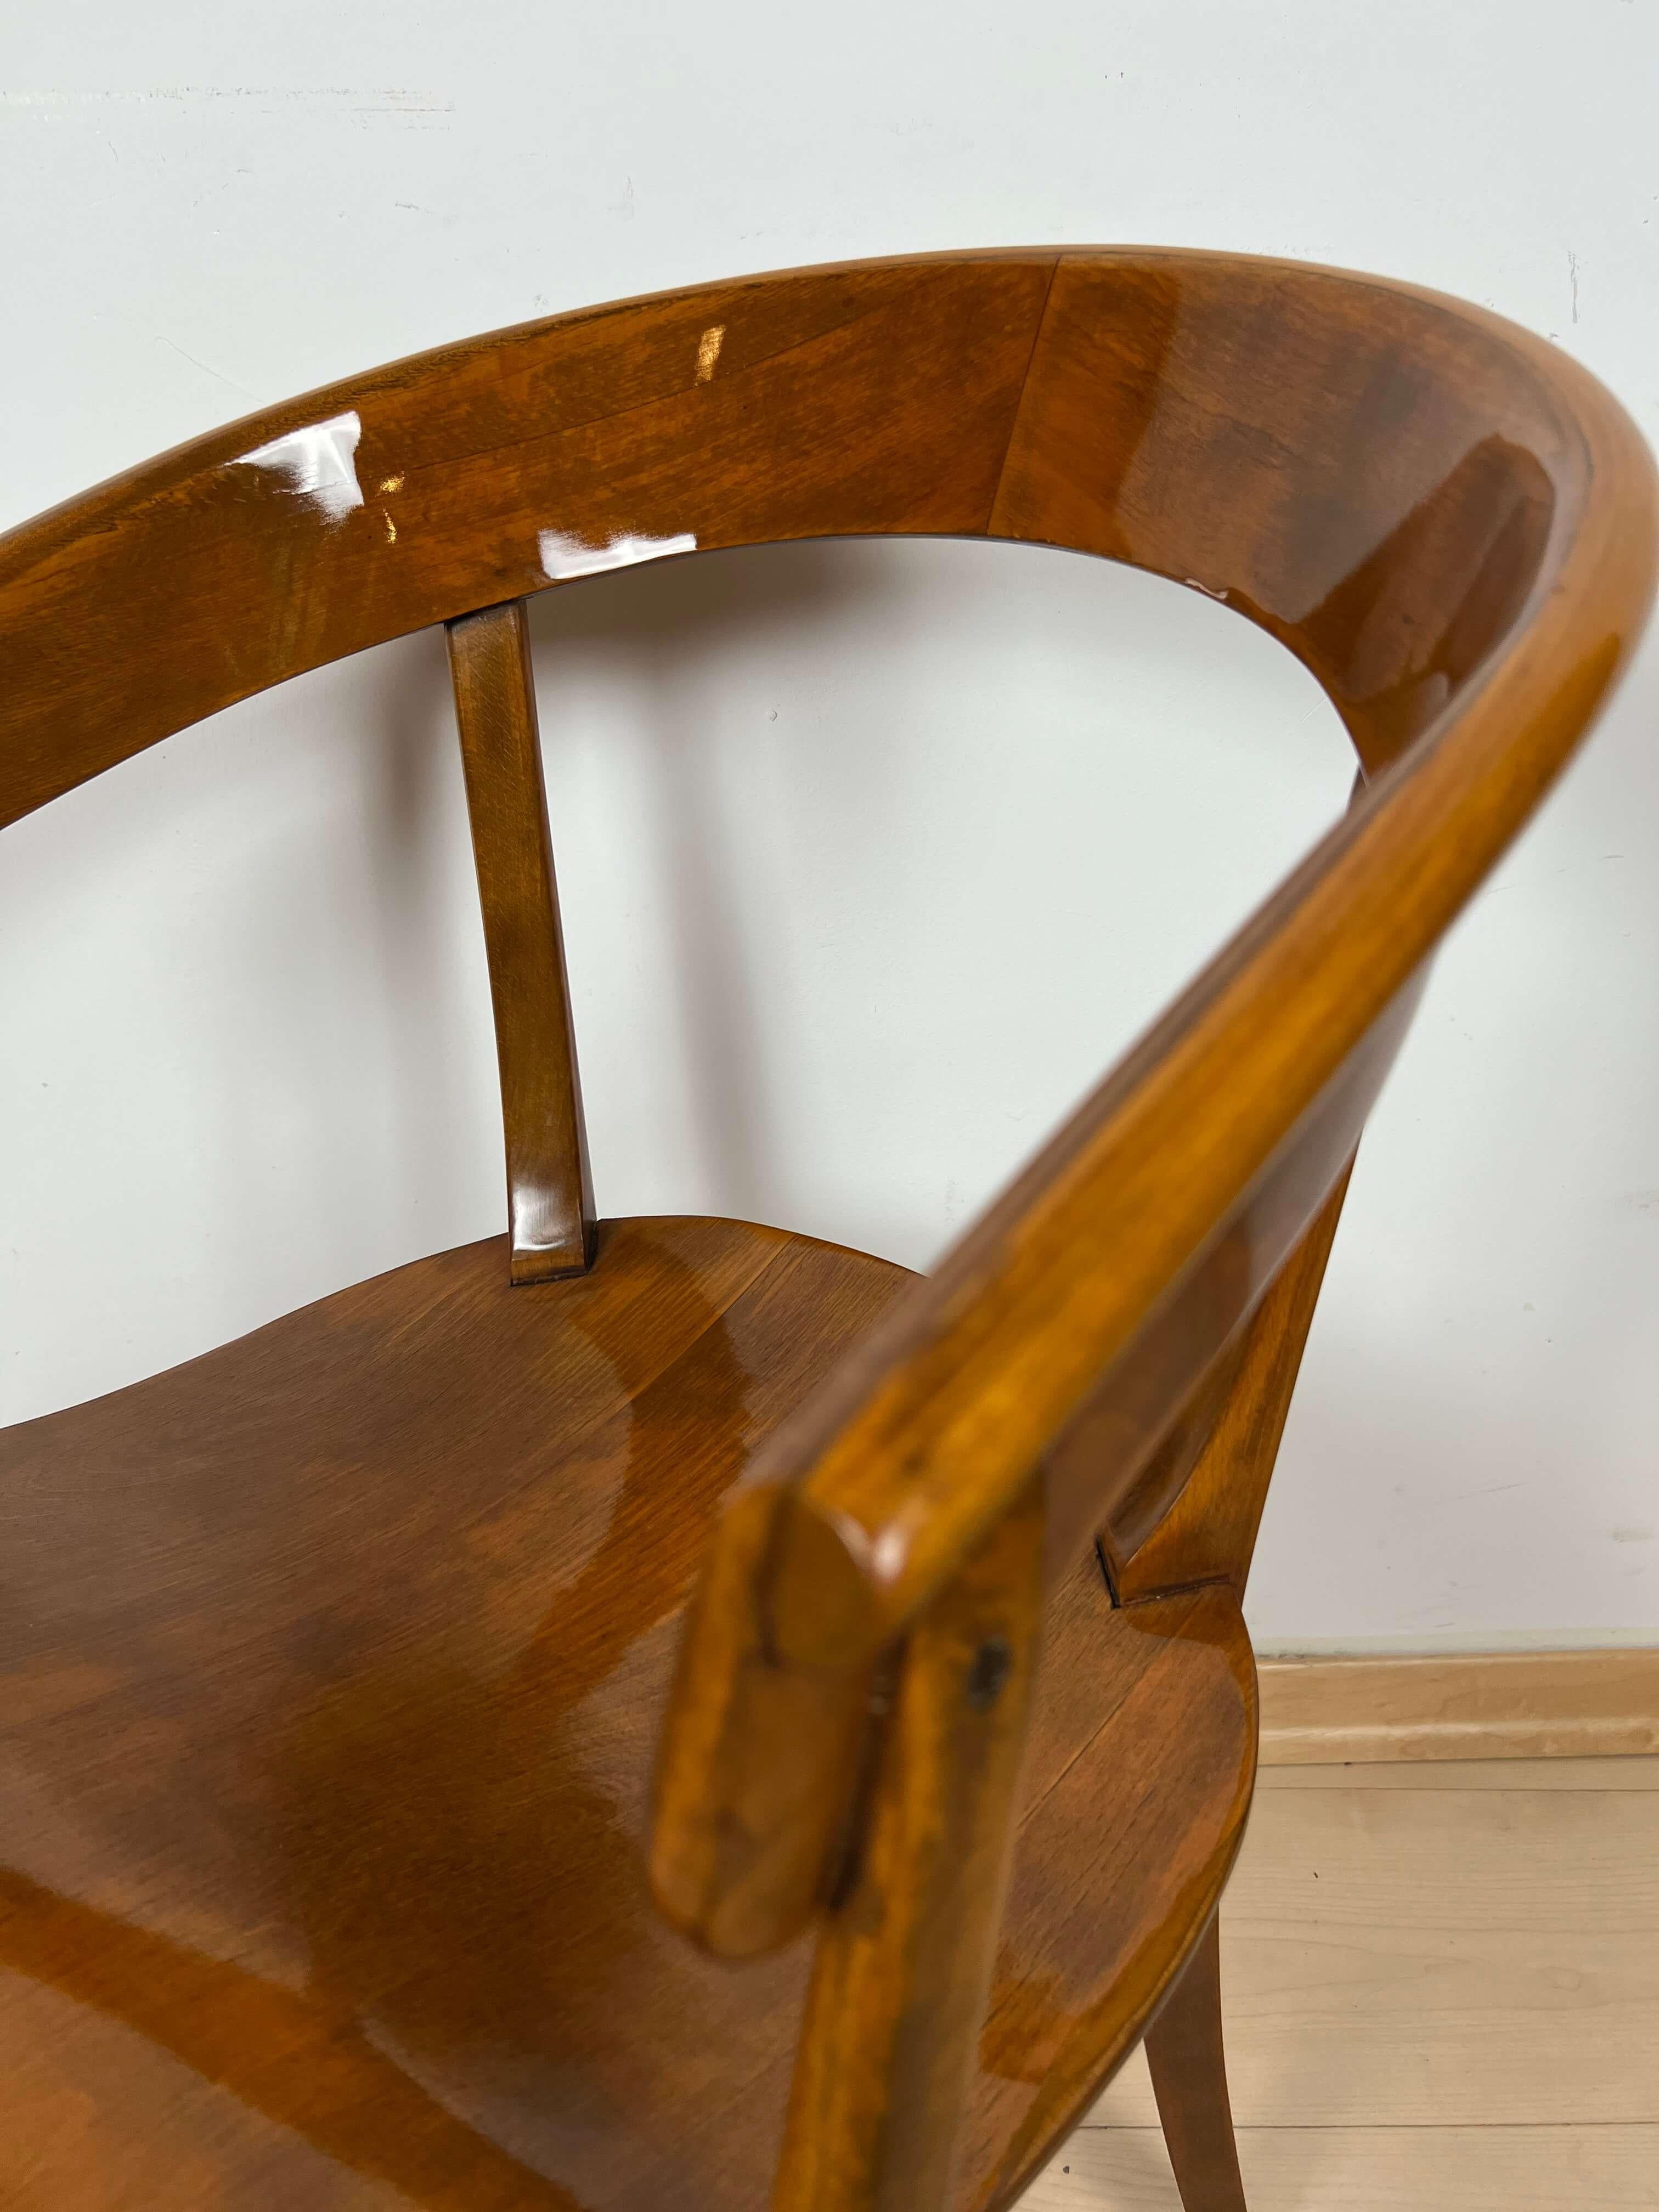 Bauhaus Armchair by Rockhausen, Polished Wood, Germany, 1928 For Sale 7